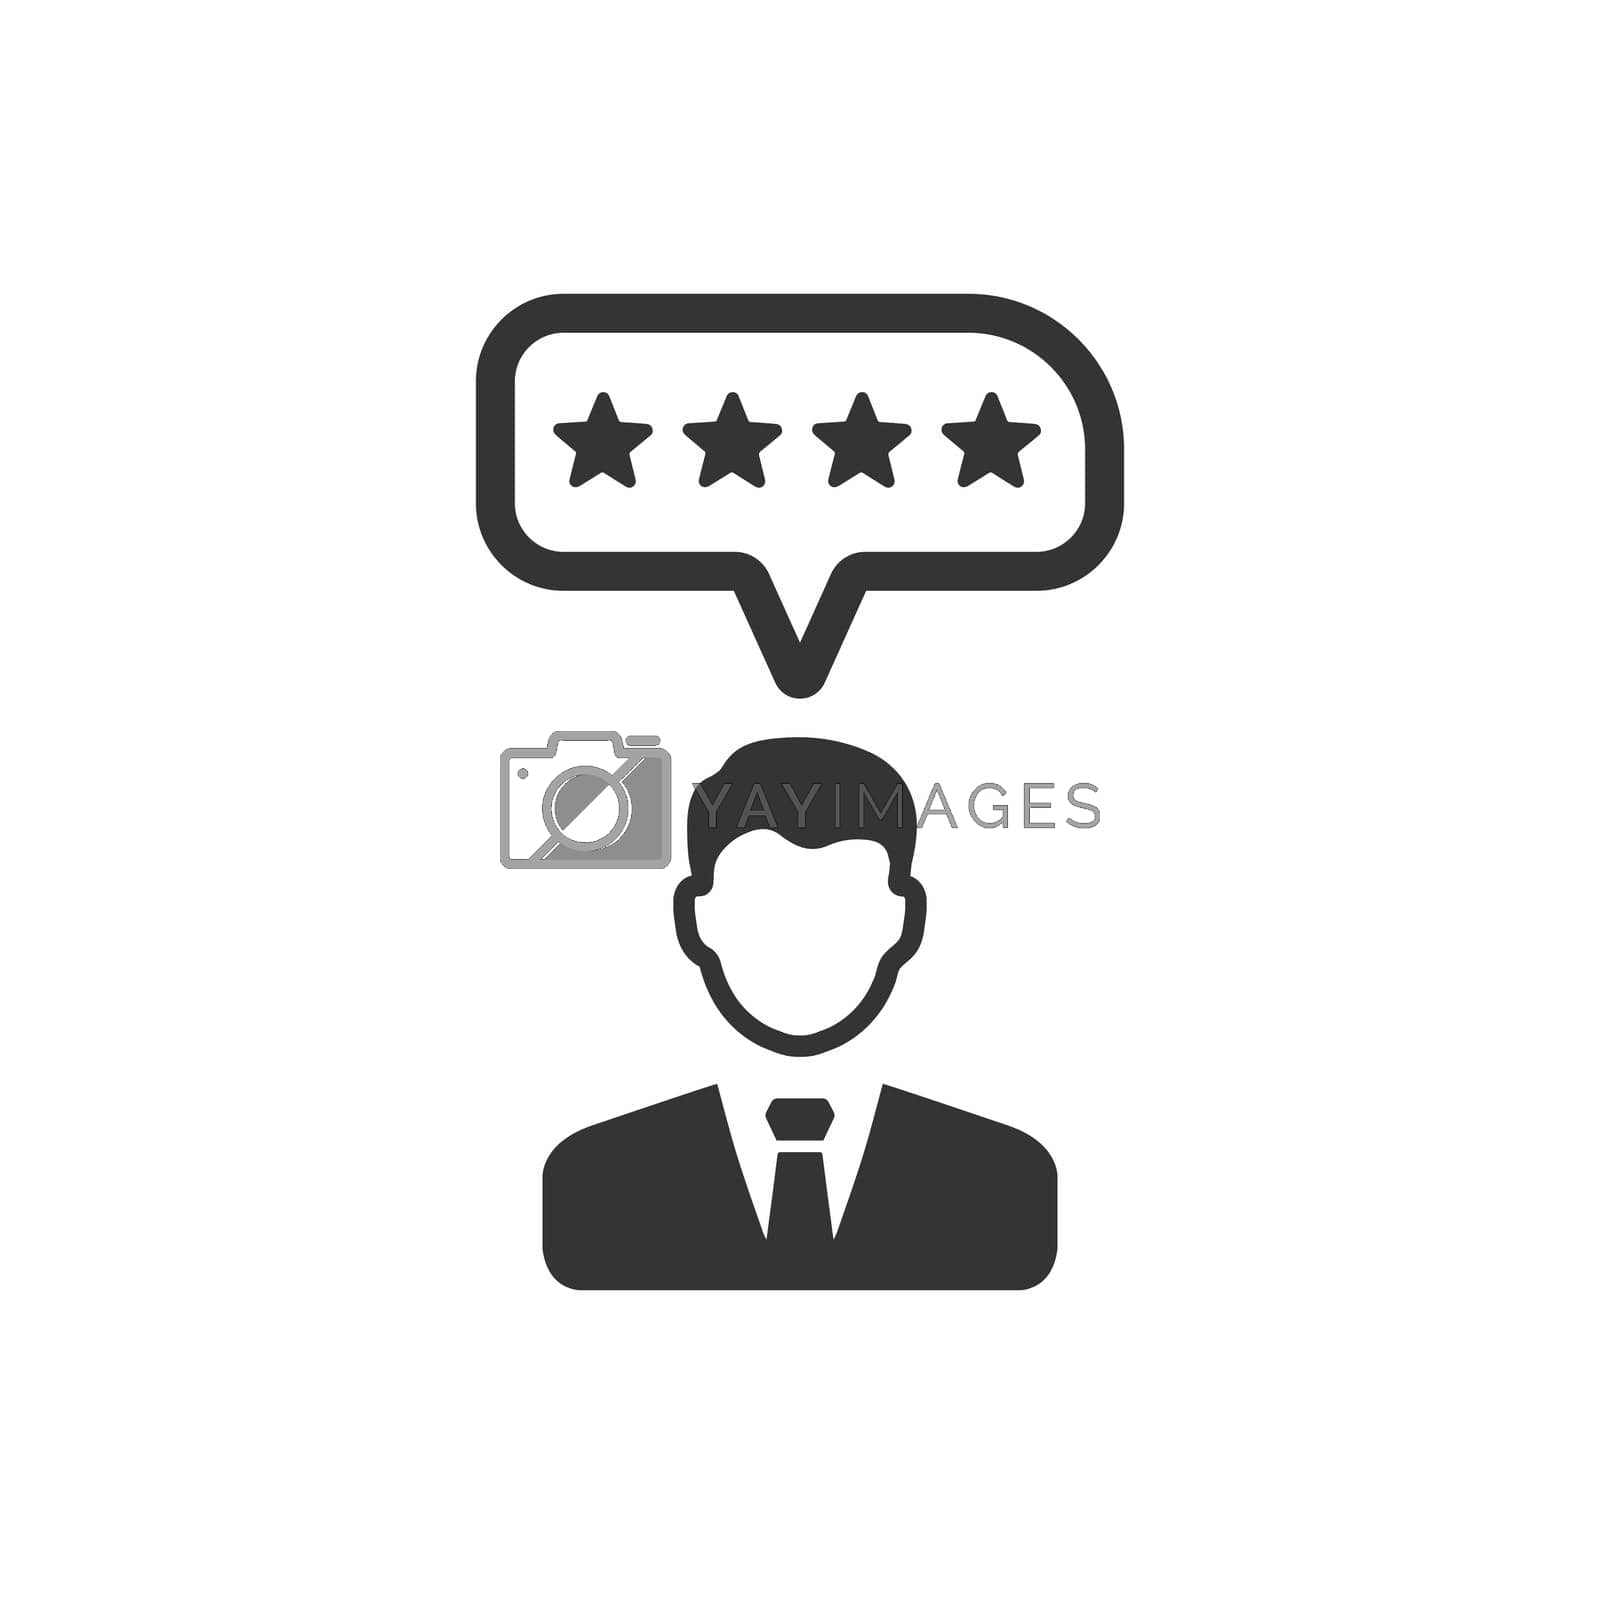 Royalty free image of User Feedback Icon by delwar018